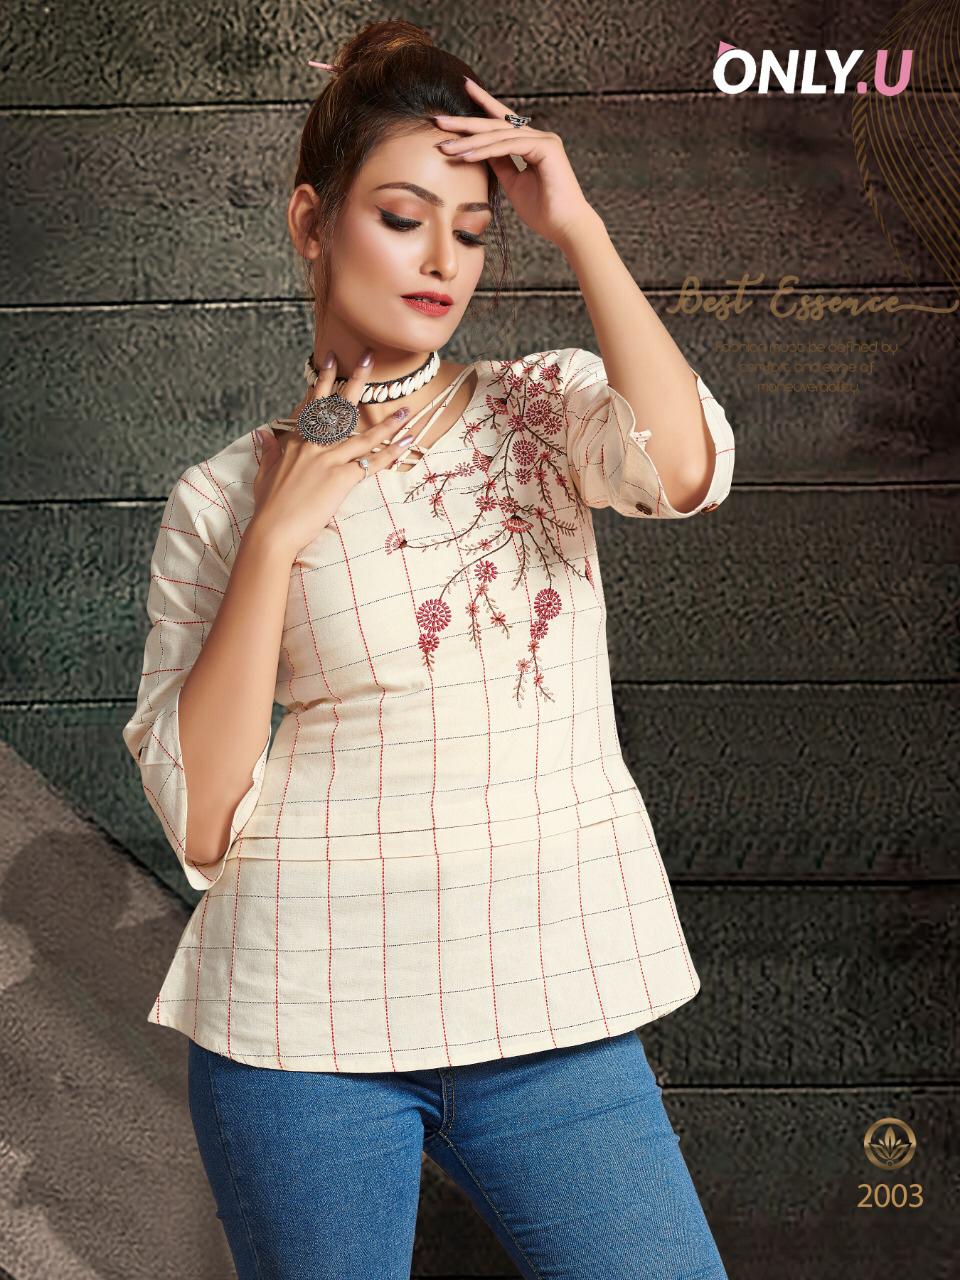 Only U Pom Pom vol 2 weaving Fancy Short Top Collection Wholesale Price